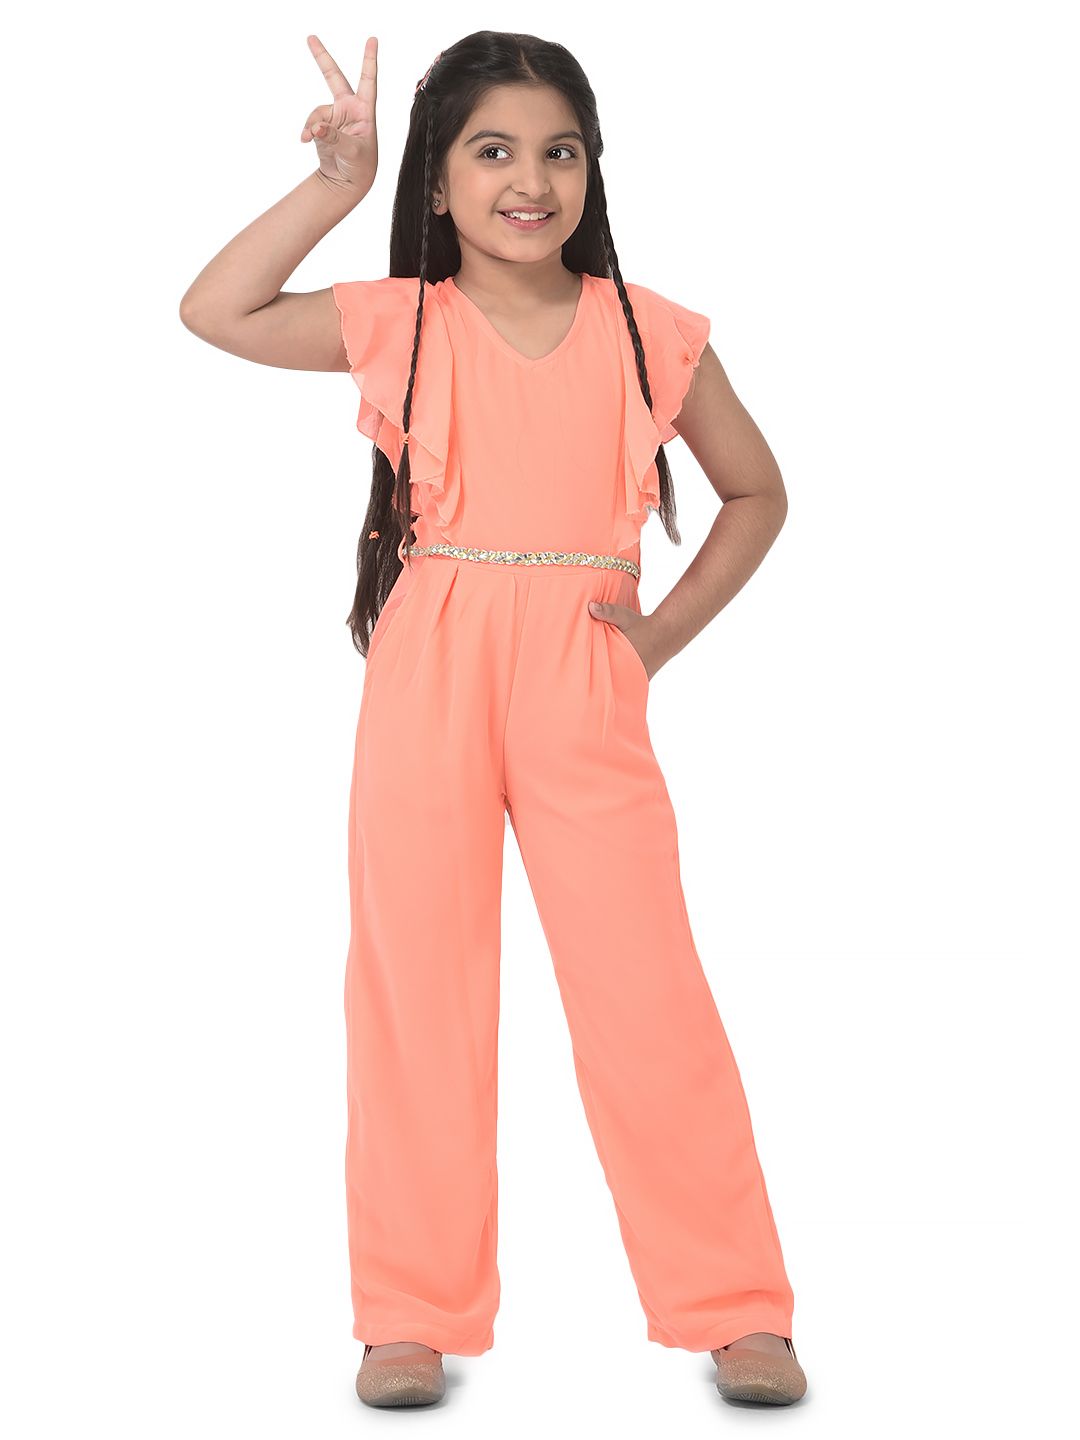 Preserve 160+ jumpsuit for 14 year girl latest